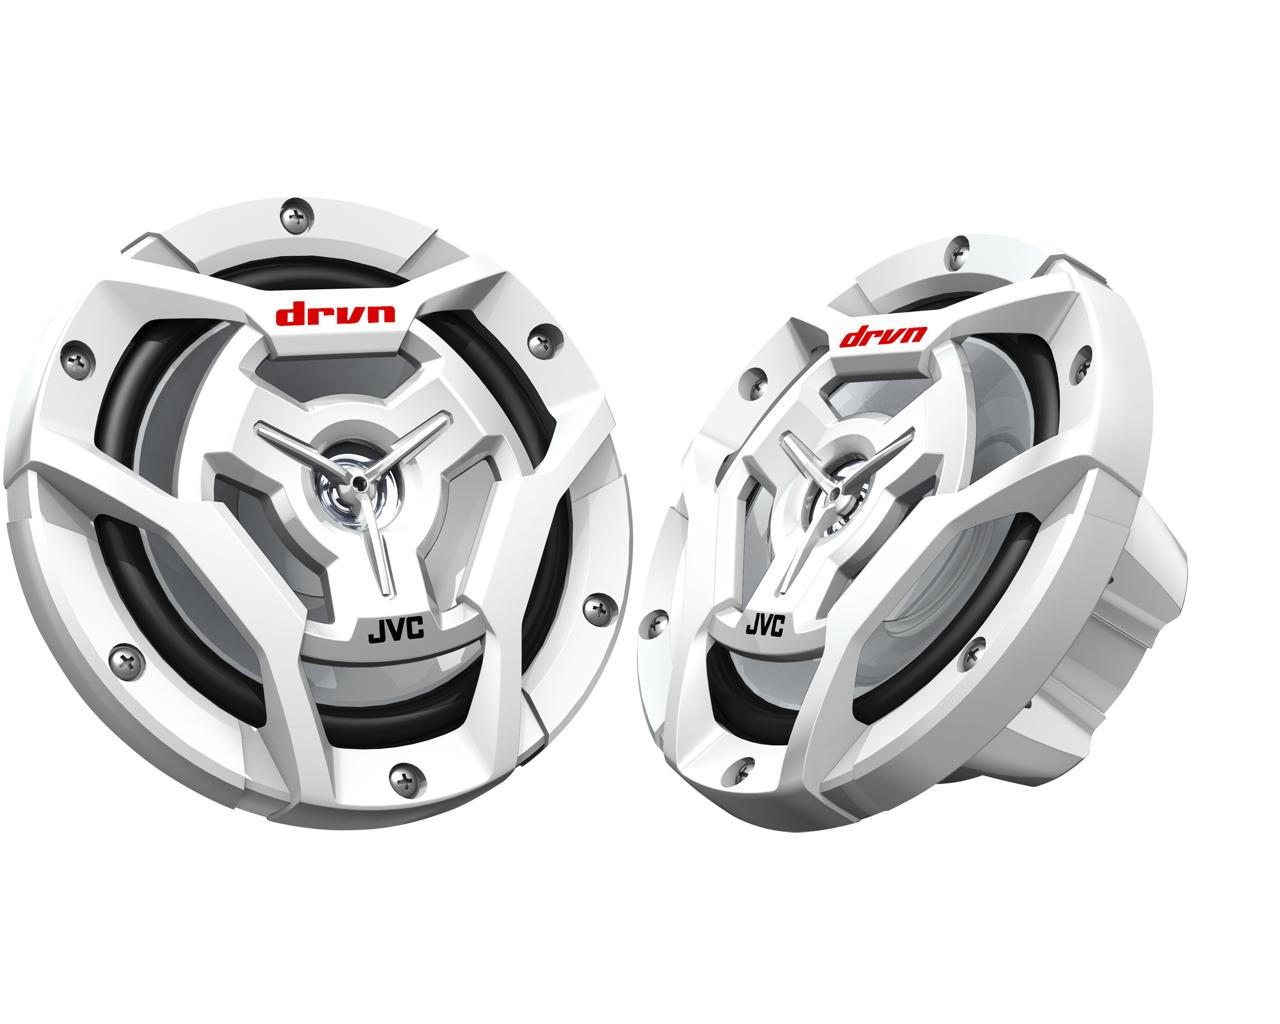 Jvc CS-DR6201 MW Product videos 300W Peak (100W RMS) 6.5” DRVN Series 2-Way Marine Coaxial Speakers in White